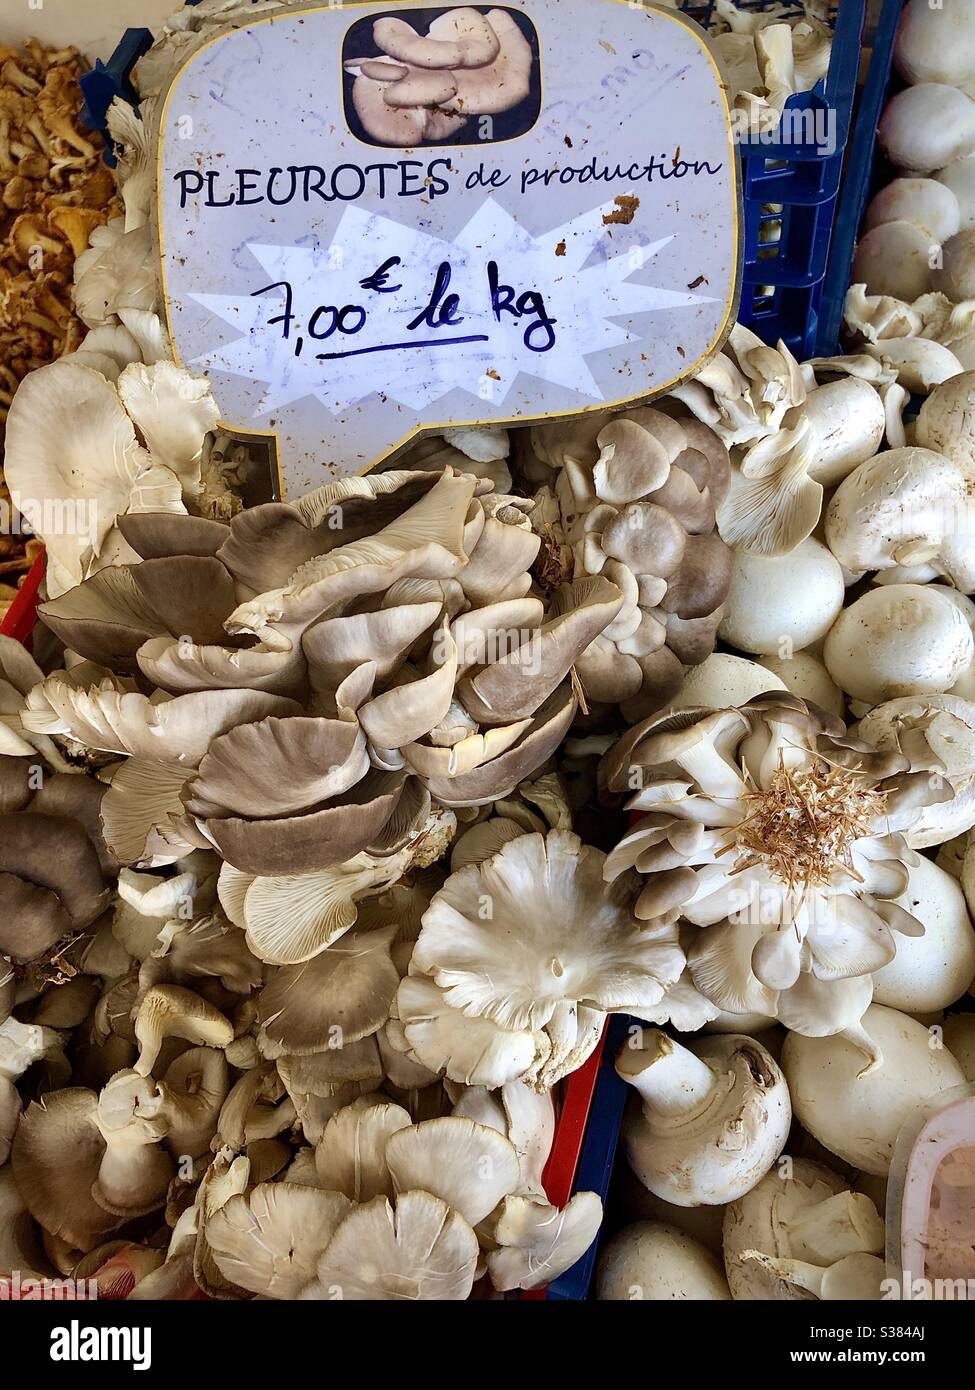 Pleurotes mushrooms for sale on French market stall - Le Blanc, Indre, France. Stock Photo